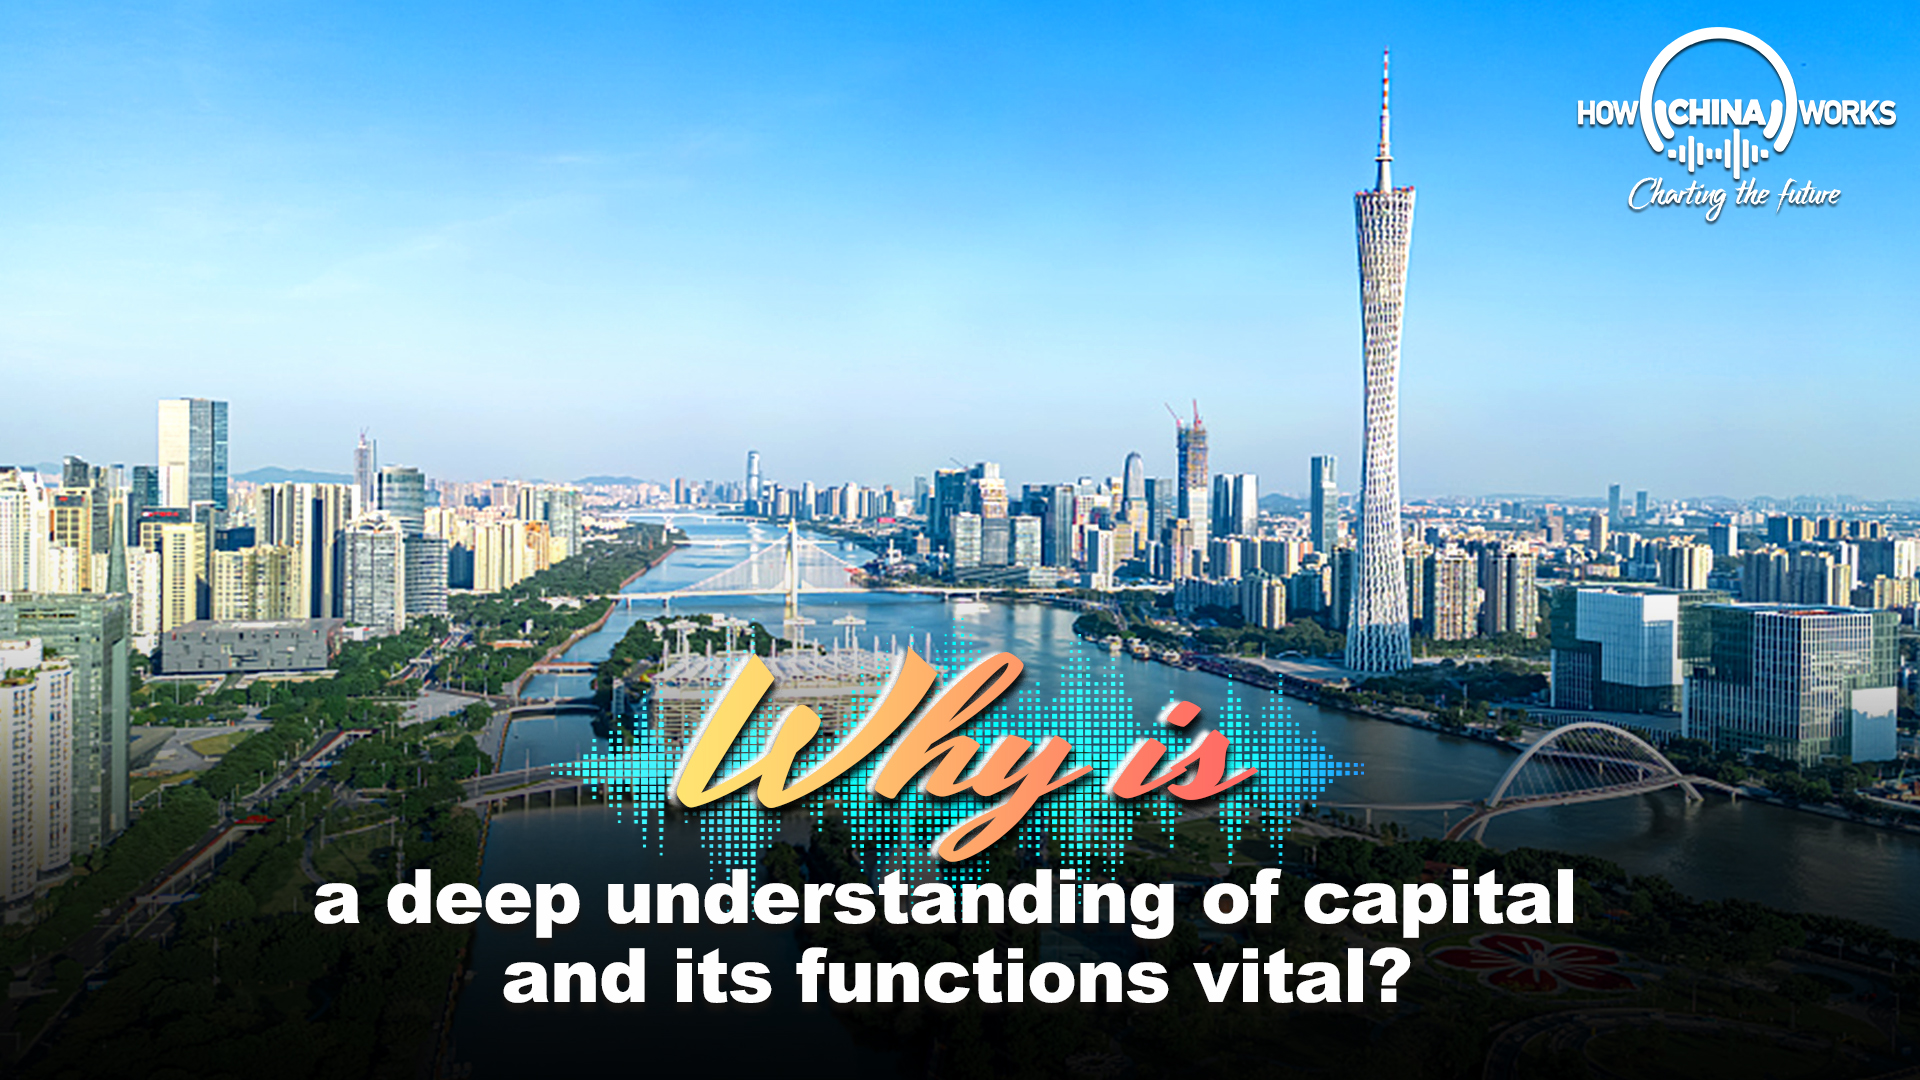 Why is a deep understanding of capital and its functions vital?